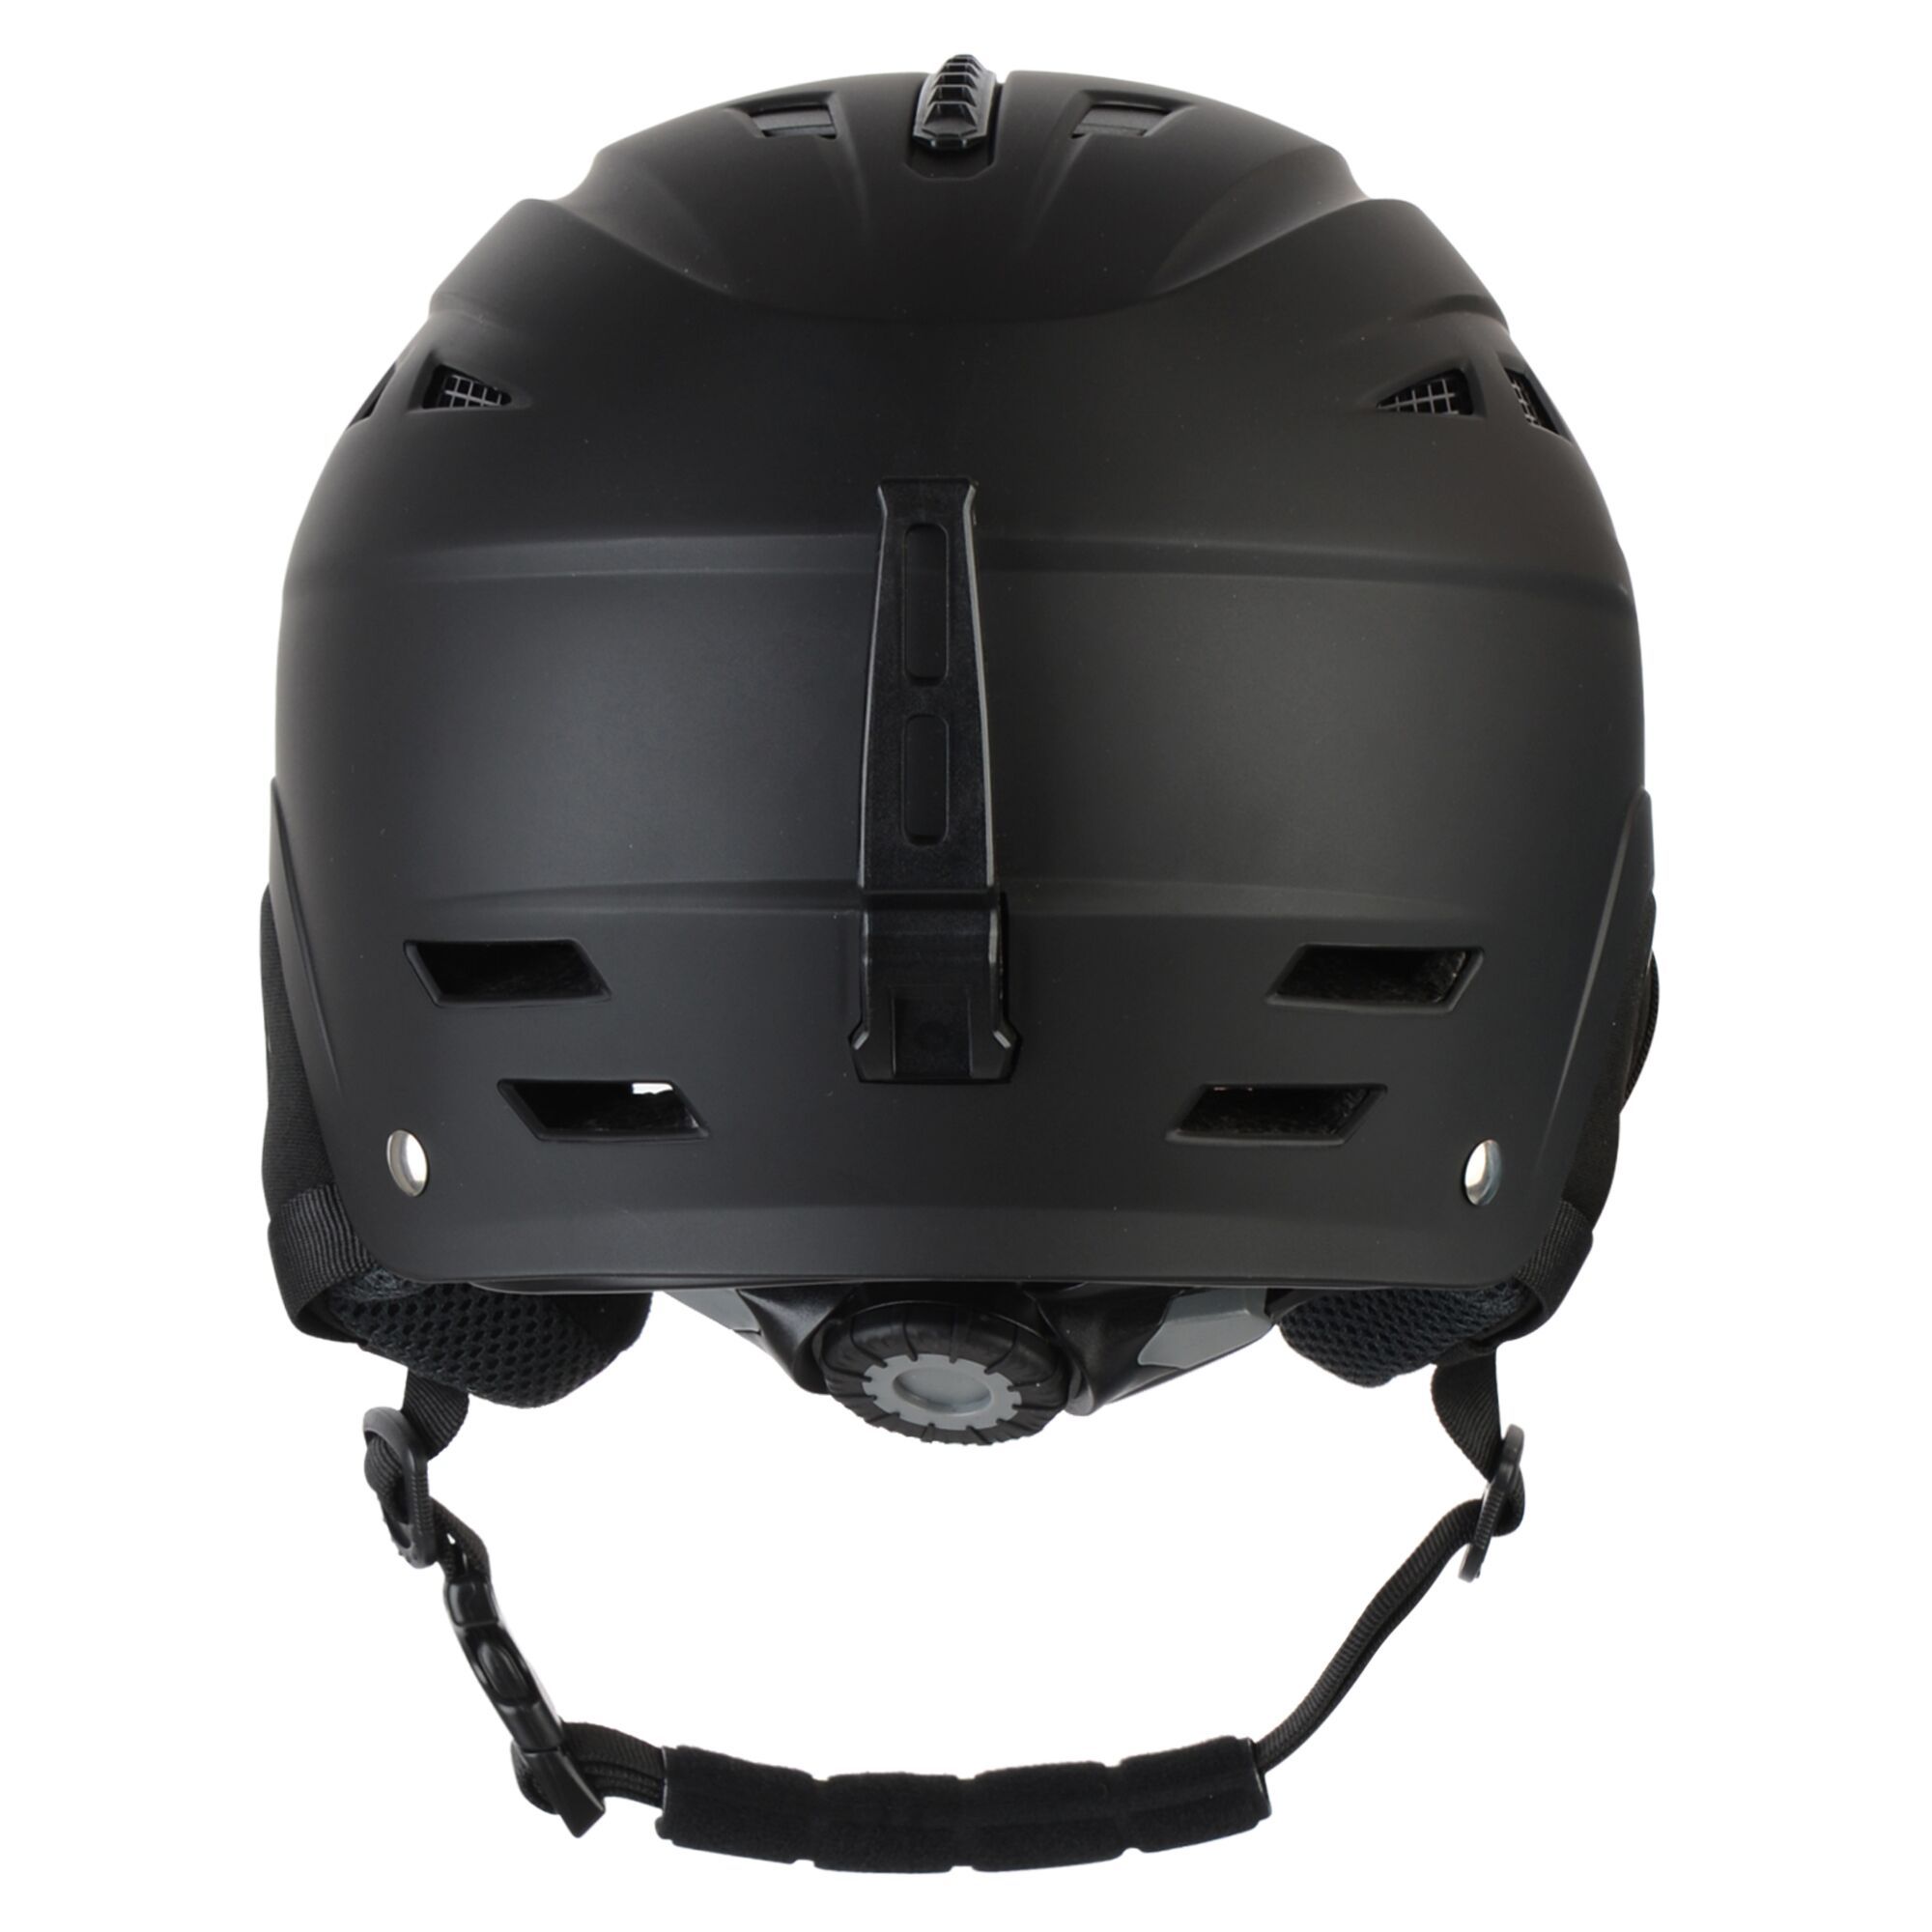 ABS construction with an EPS foam lining ensures excellent impact protection. Low-profile, adjustable air vents for quick and easy temperature regulation. Integral goggle clip for keeping goggles in position whilst on the slope. Size adjustment dial system for easy helmet fitting. Complies to CE EN1077 standards.